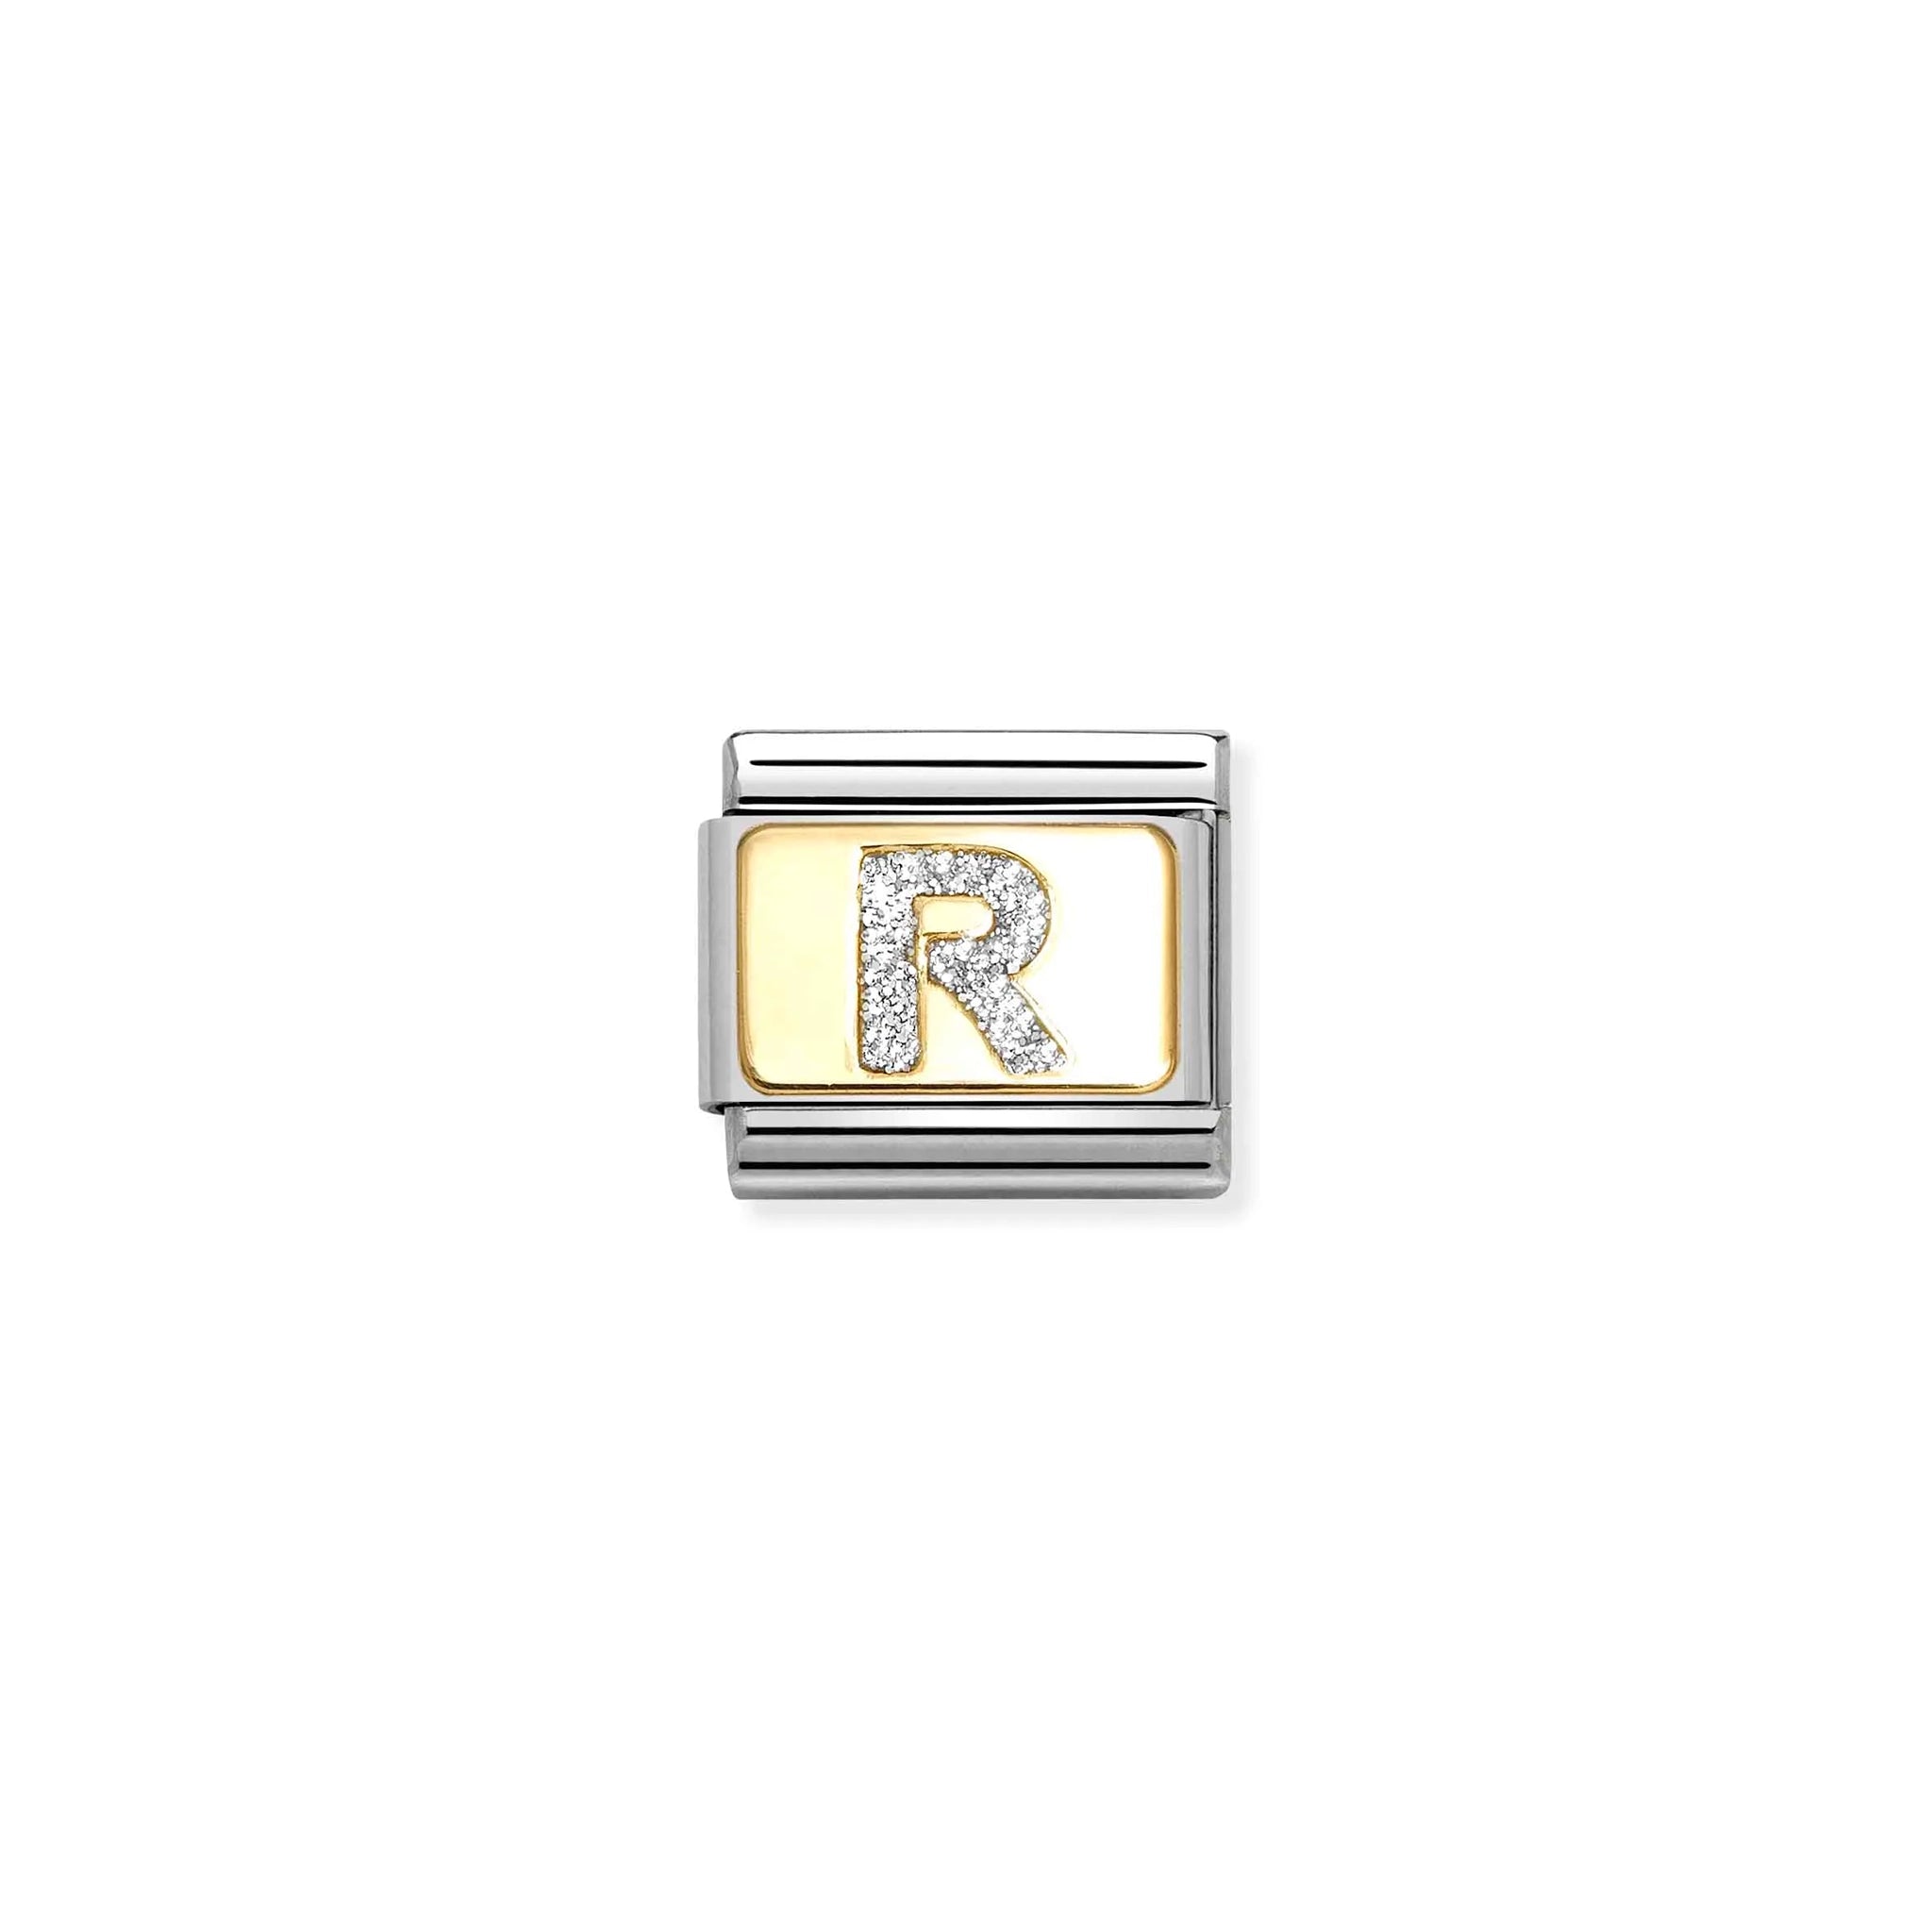 Nomination charm link featuring a gold plaque with a silver glitter letter R